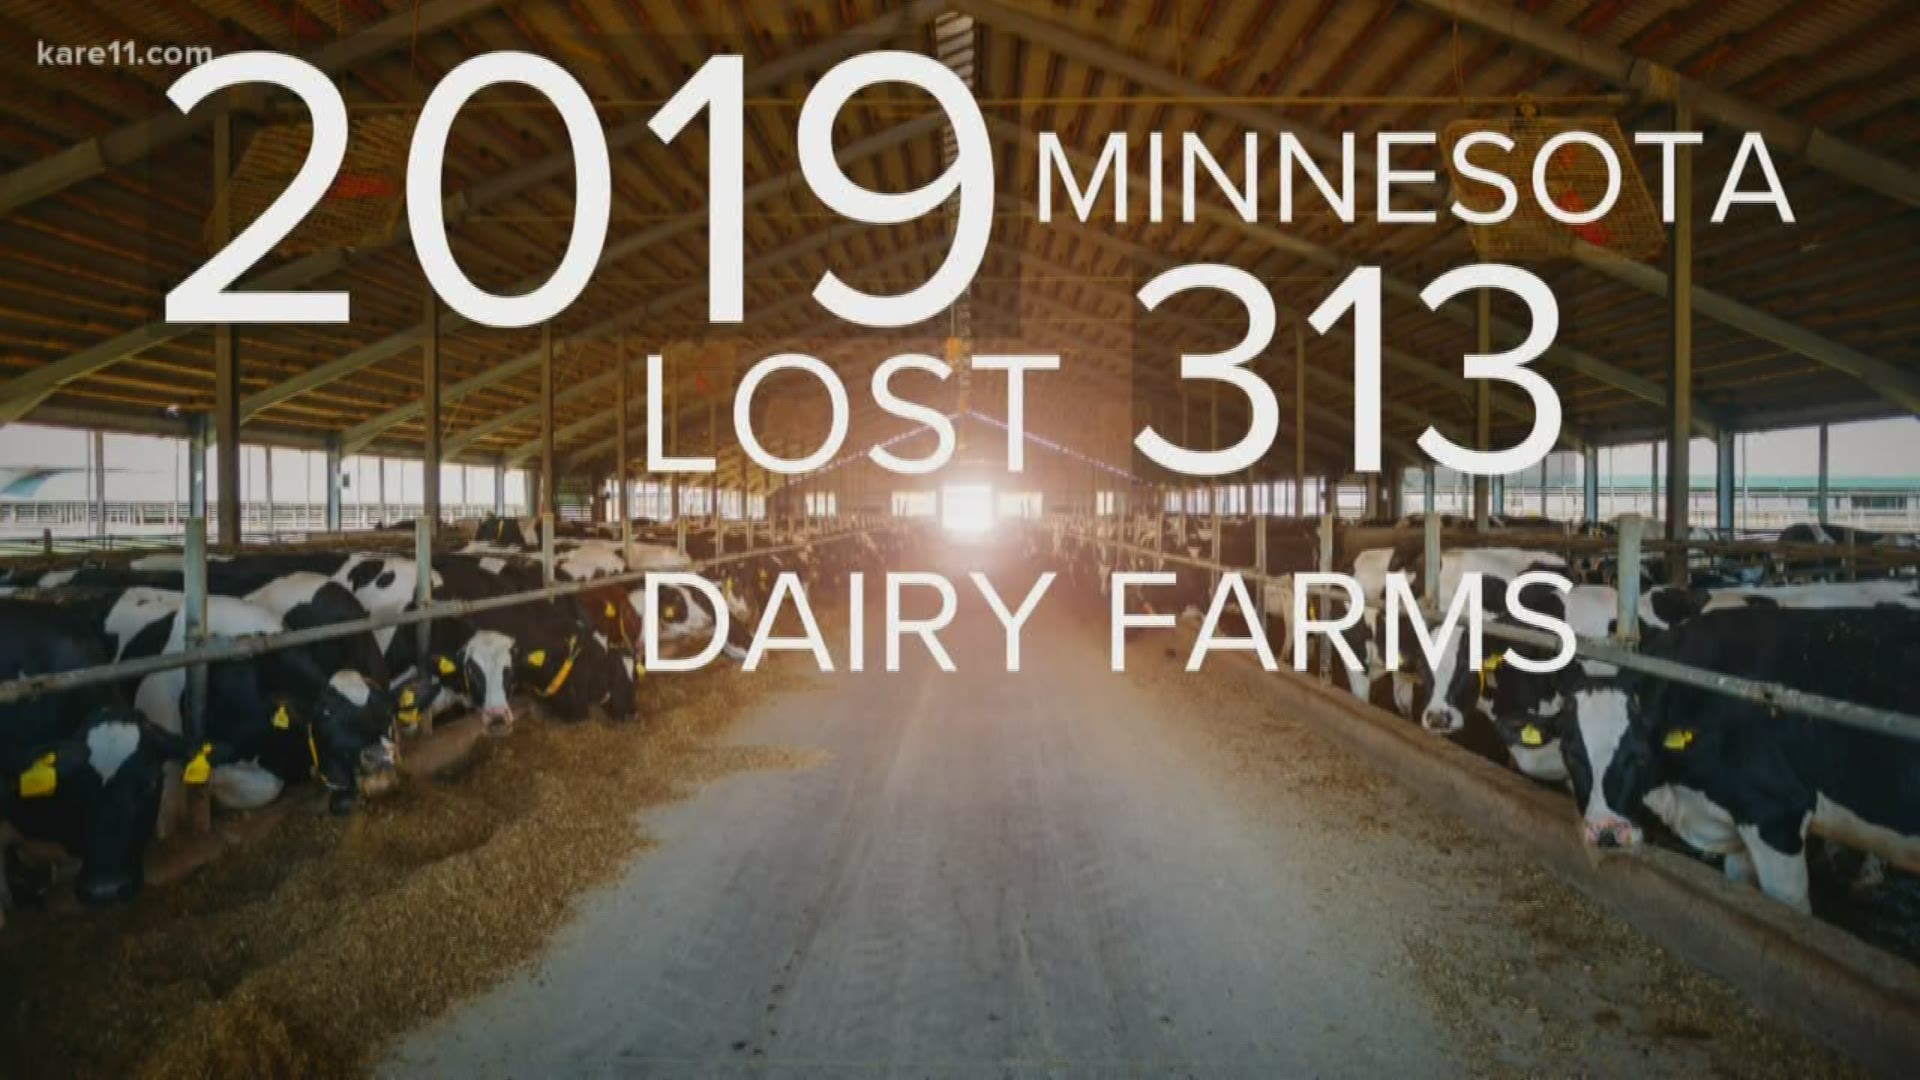 Low milk prices continued to plague dairy farmers in Minnesota and across the country.